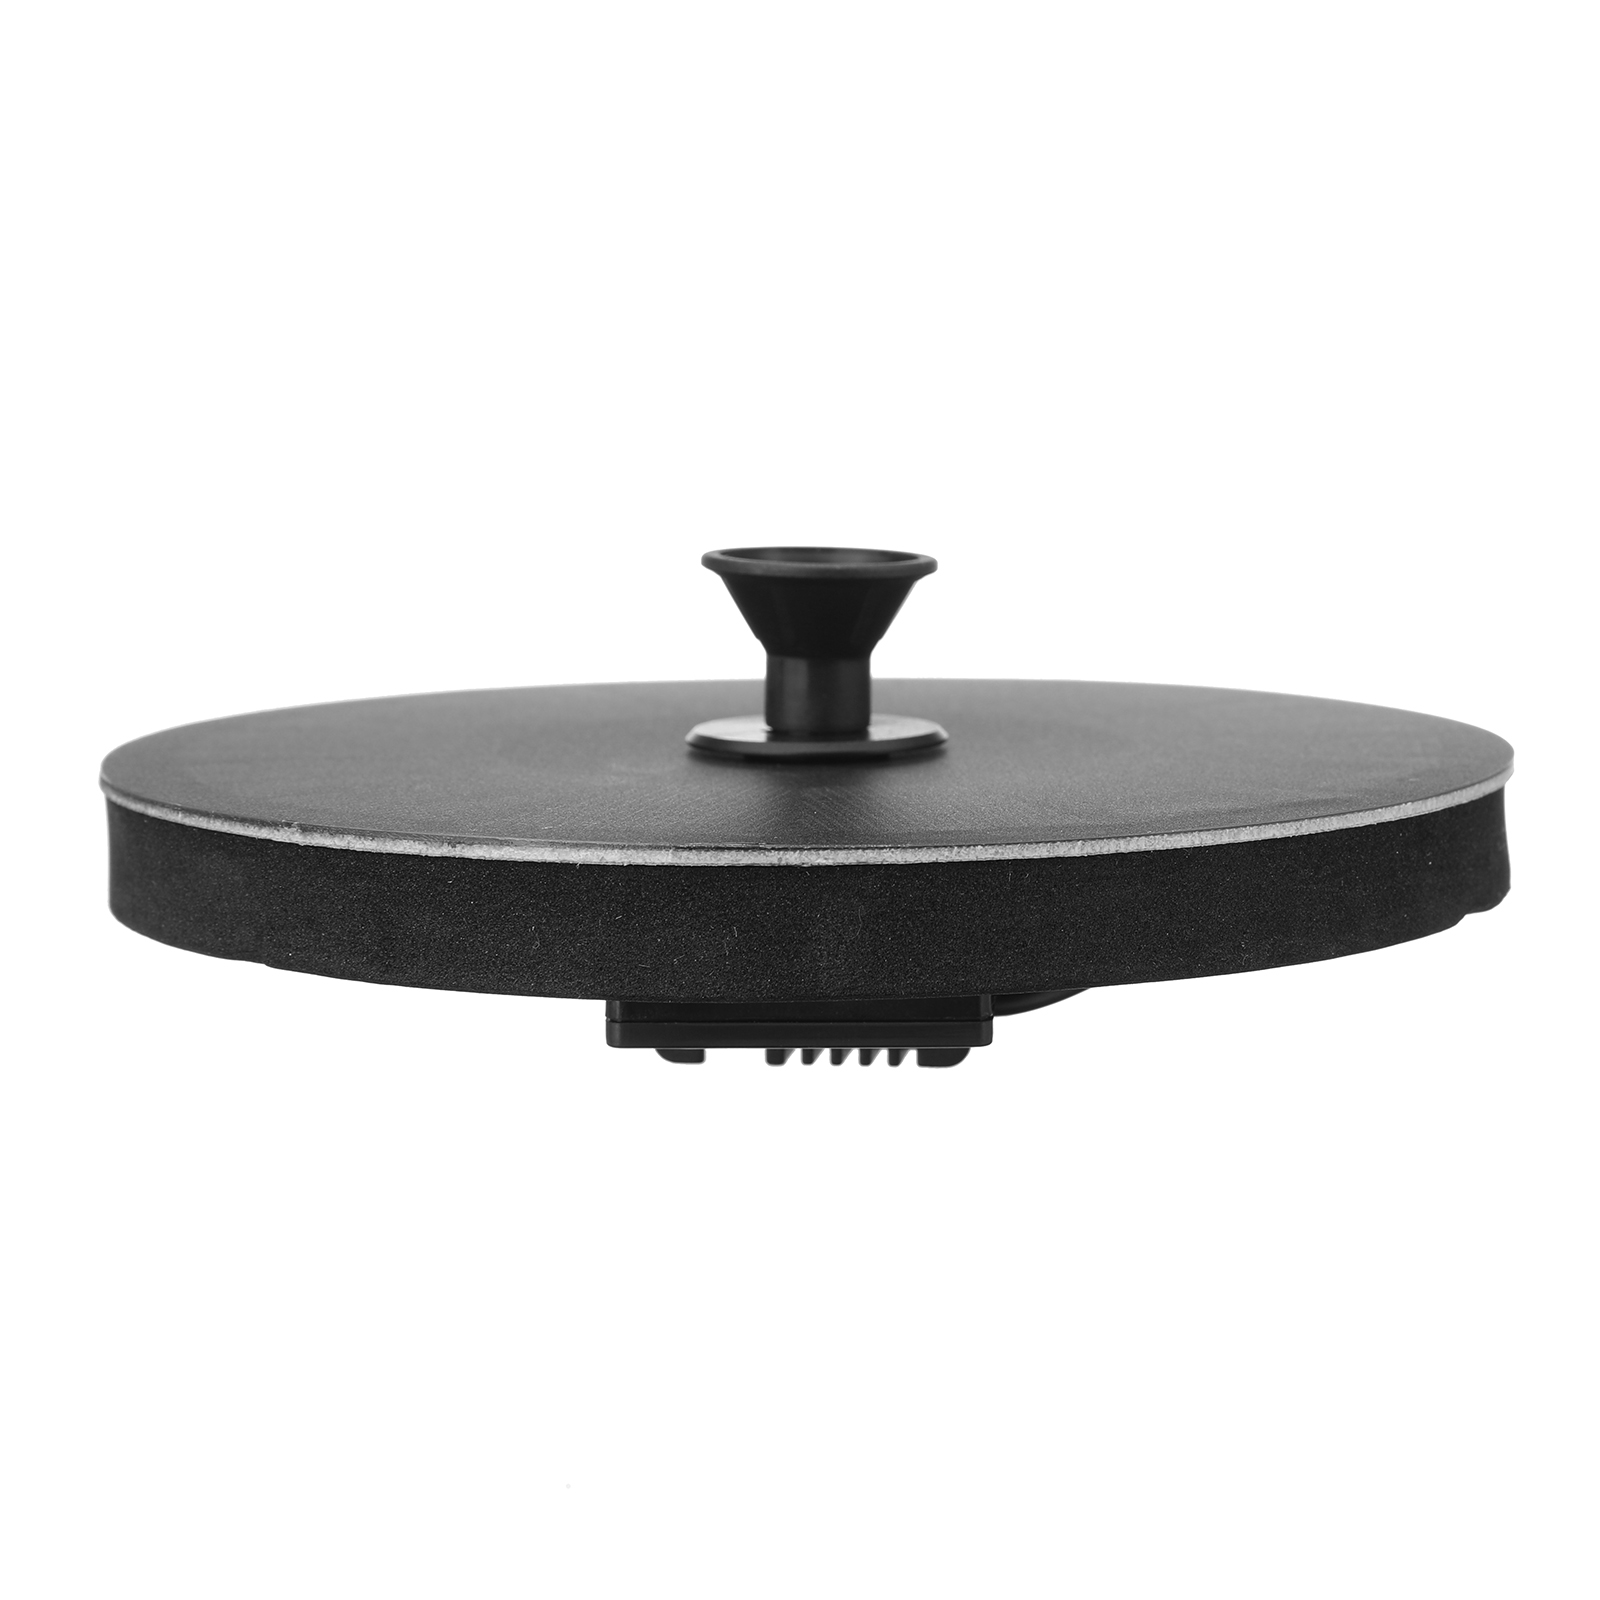 Find LIUMY Solar Fountain Pump 2 2W Floating Solar Round Water Pump Floating Panel With 7 Nozzles for Pond Fountain BirdBath Garden Decoration Water Cycling for Sale on Gipsybee.com with cryptocurrencies